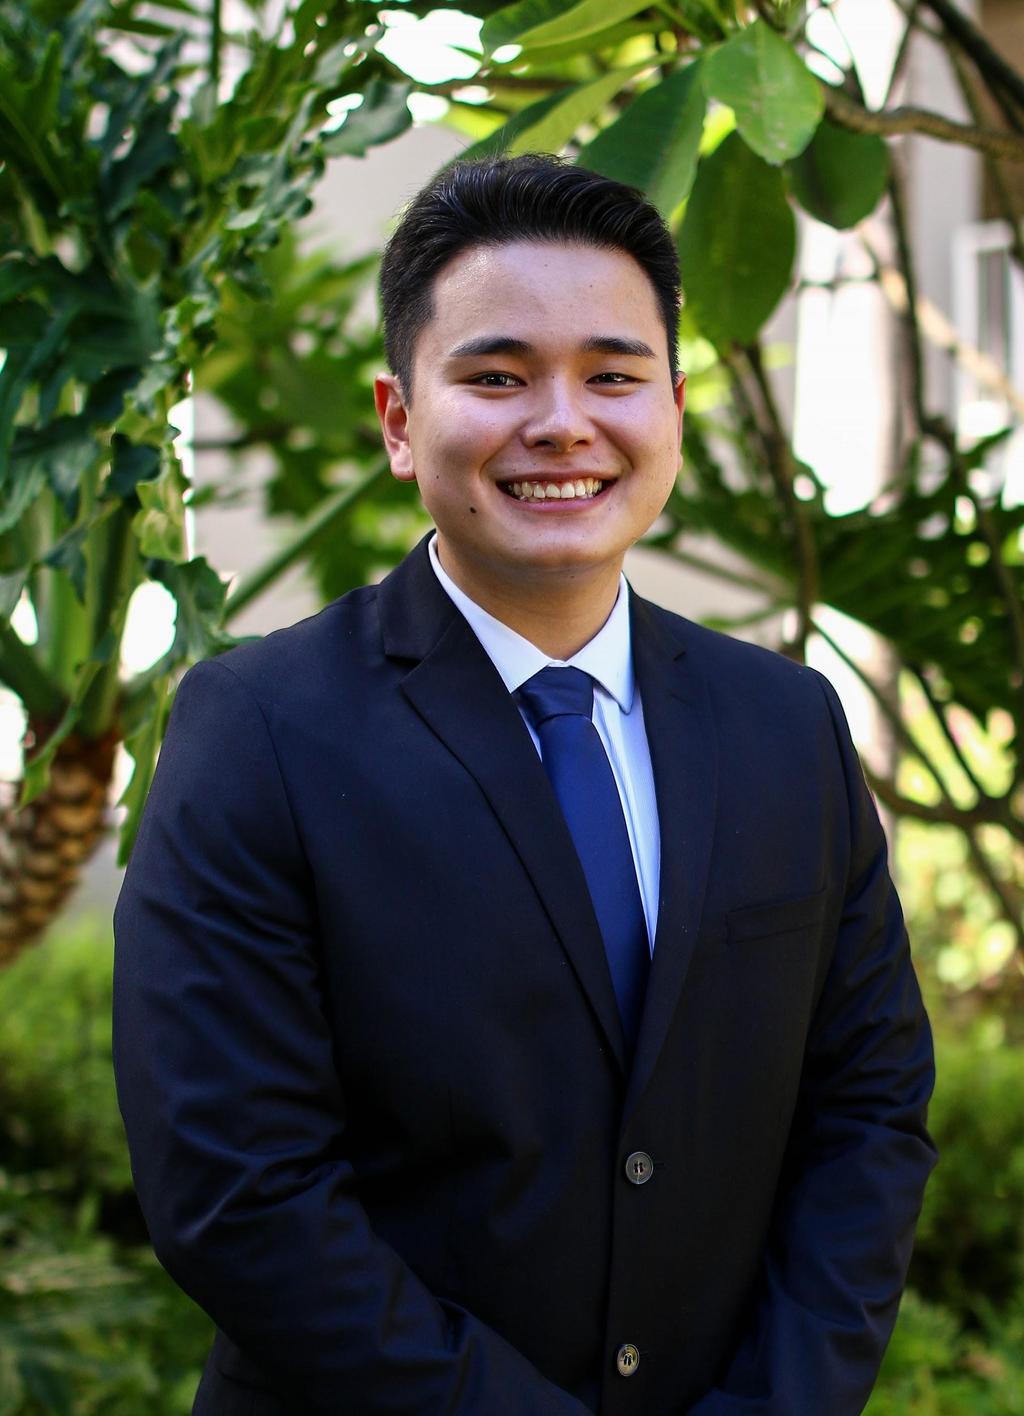 Hey AC! My name is Royce Yamamoto and I am your Director of Information ystems. ome things I take care of are sending you out these newsletters, taking pictures at events, and updating the website.